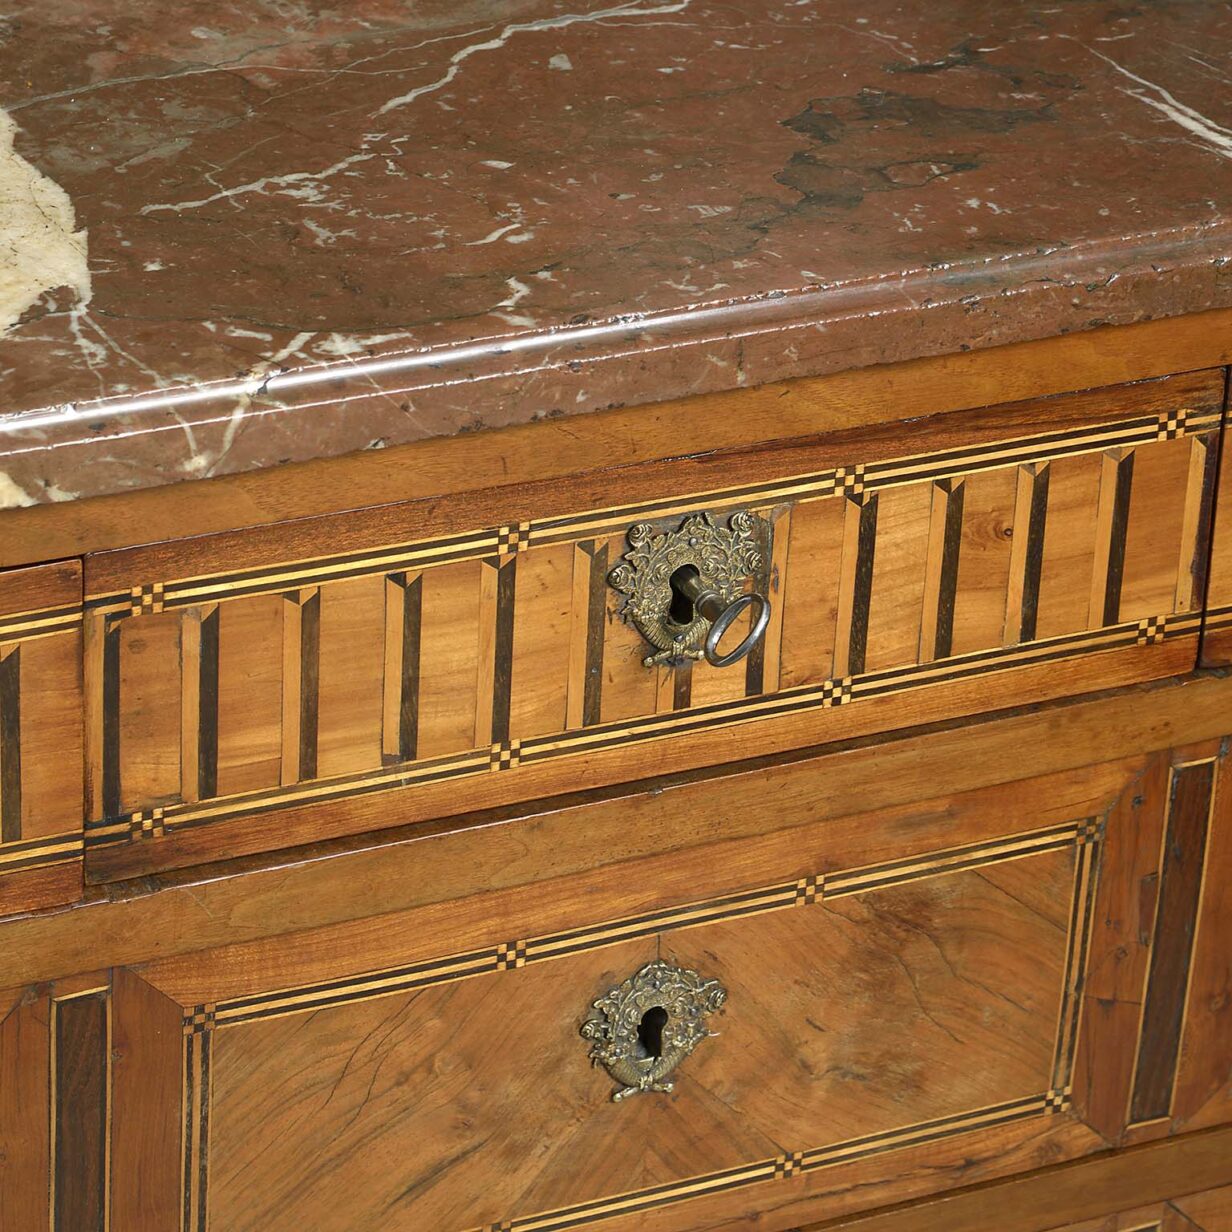 Late 18th century louis xvi period parquetry commode